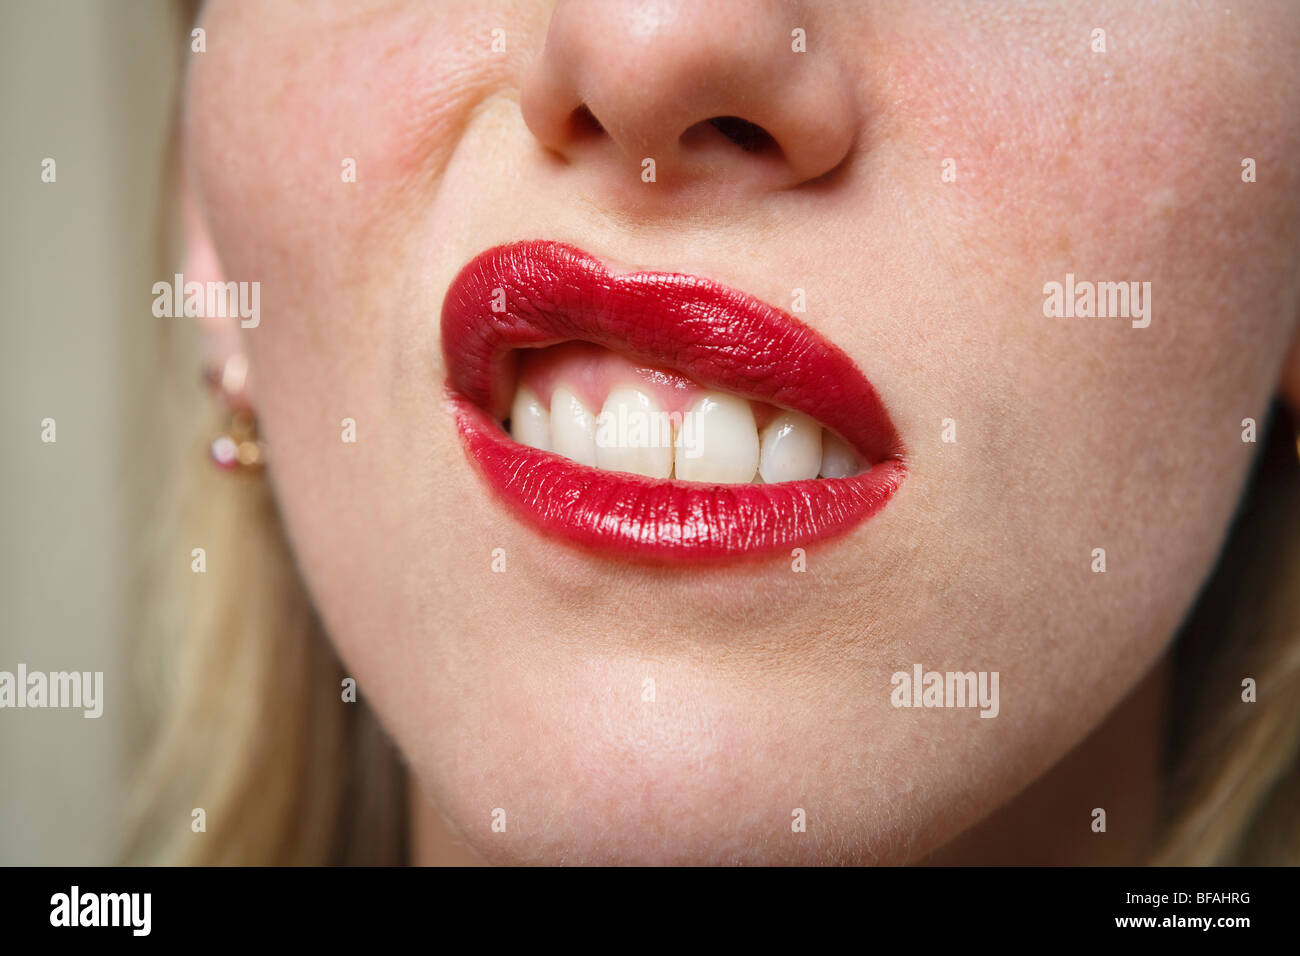 Young woman with a disdainful expression, lip turned up scornfully or skeptically Stock Photo